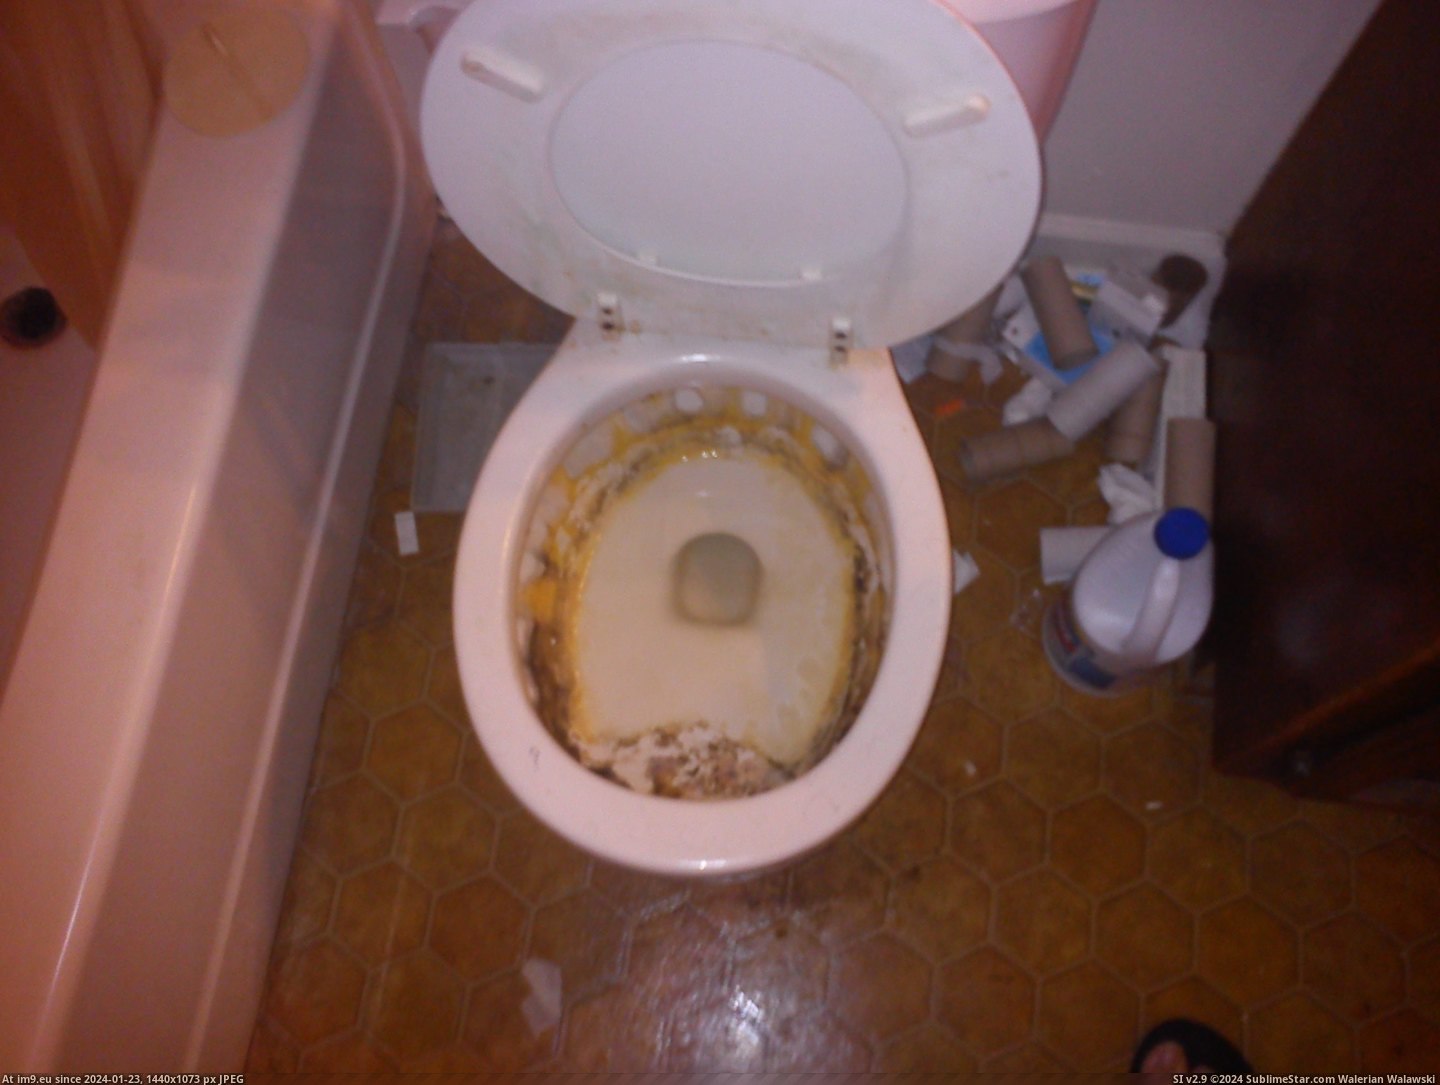 #Wtf #Summer #Roommate #Lives #Asked #Clean [Wtf] This is how my roommate lives. We've asked him to clean it since last summer, and he doesn't want to do it without help. H Pic. (Image of album My r/WTF favs))